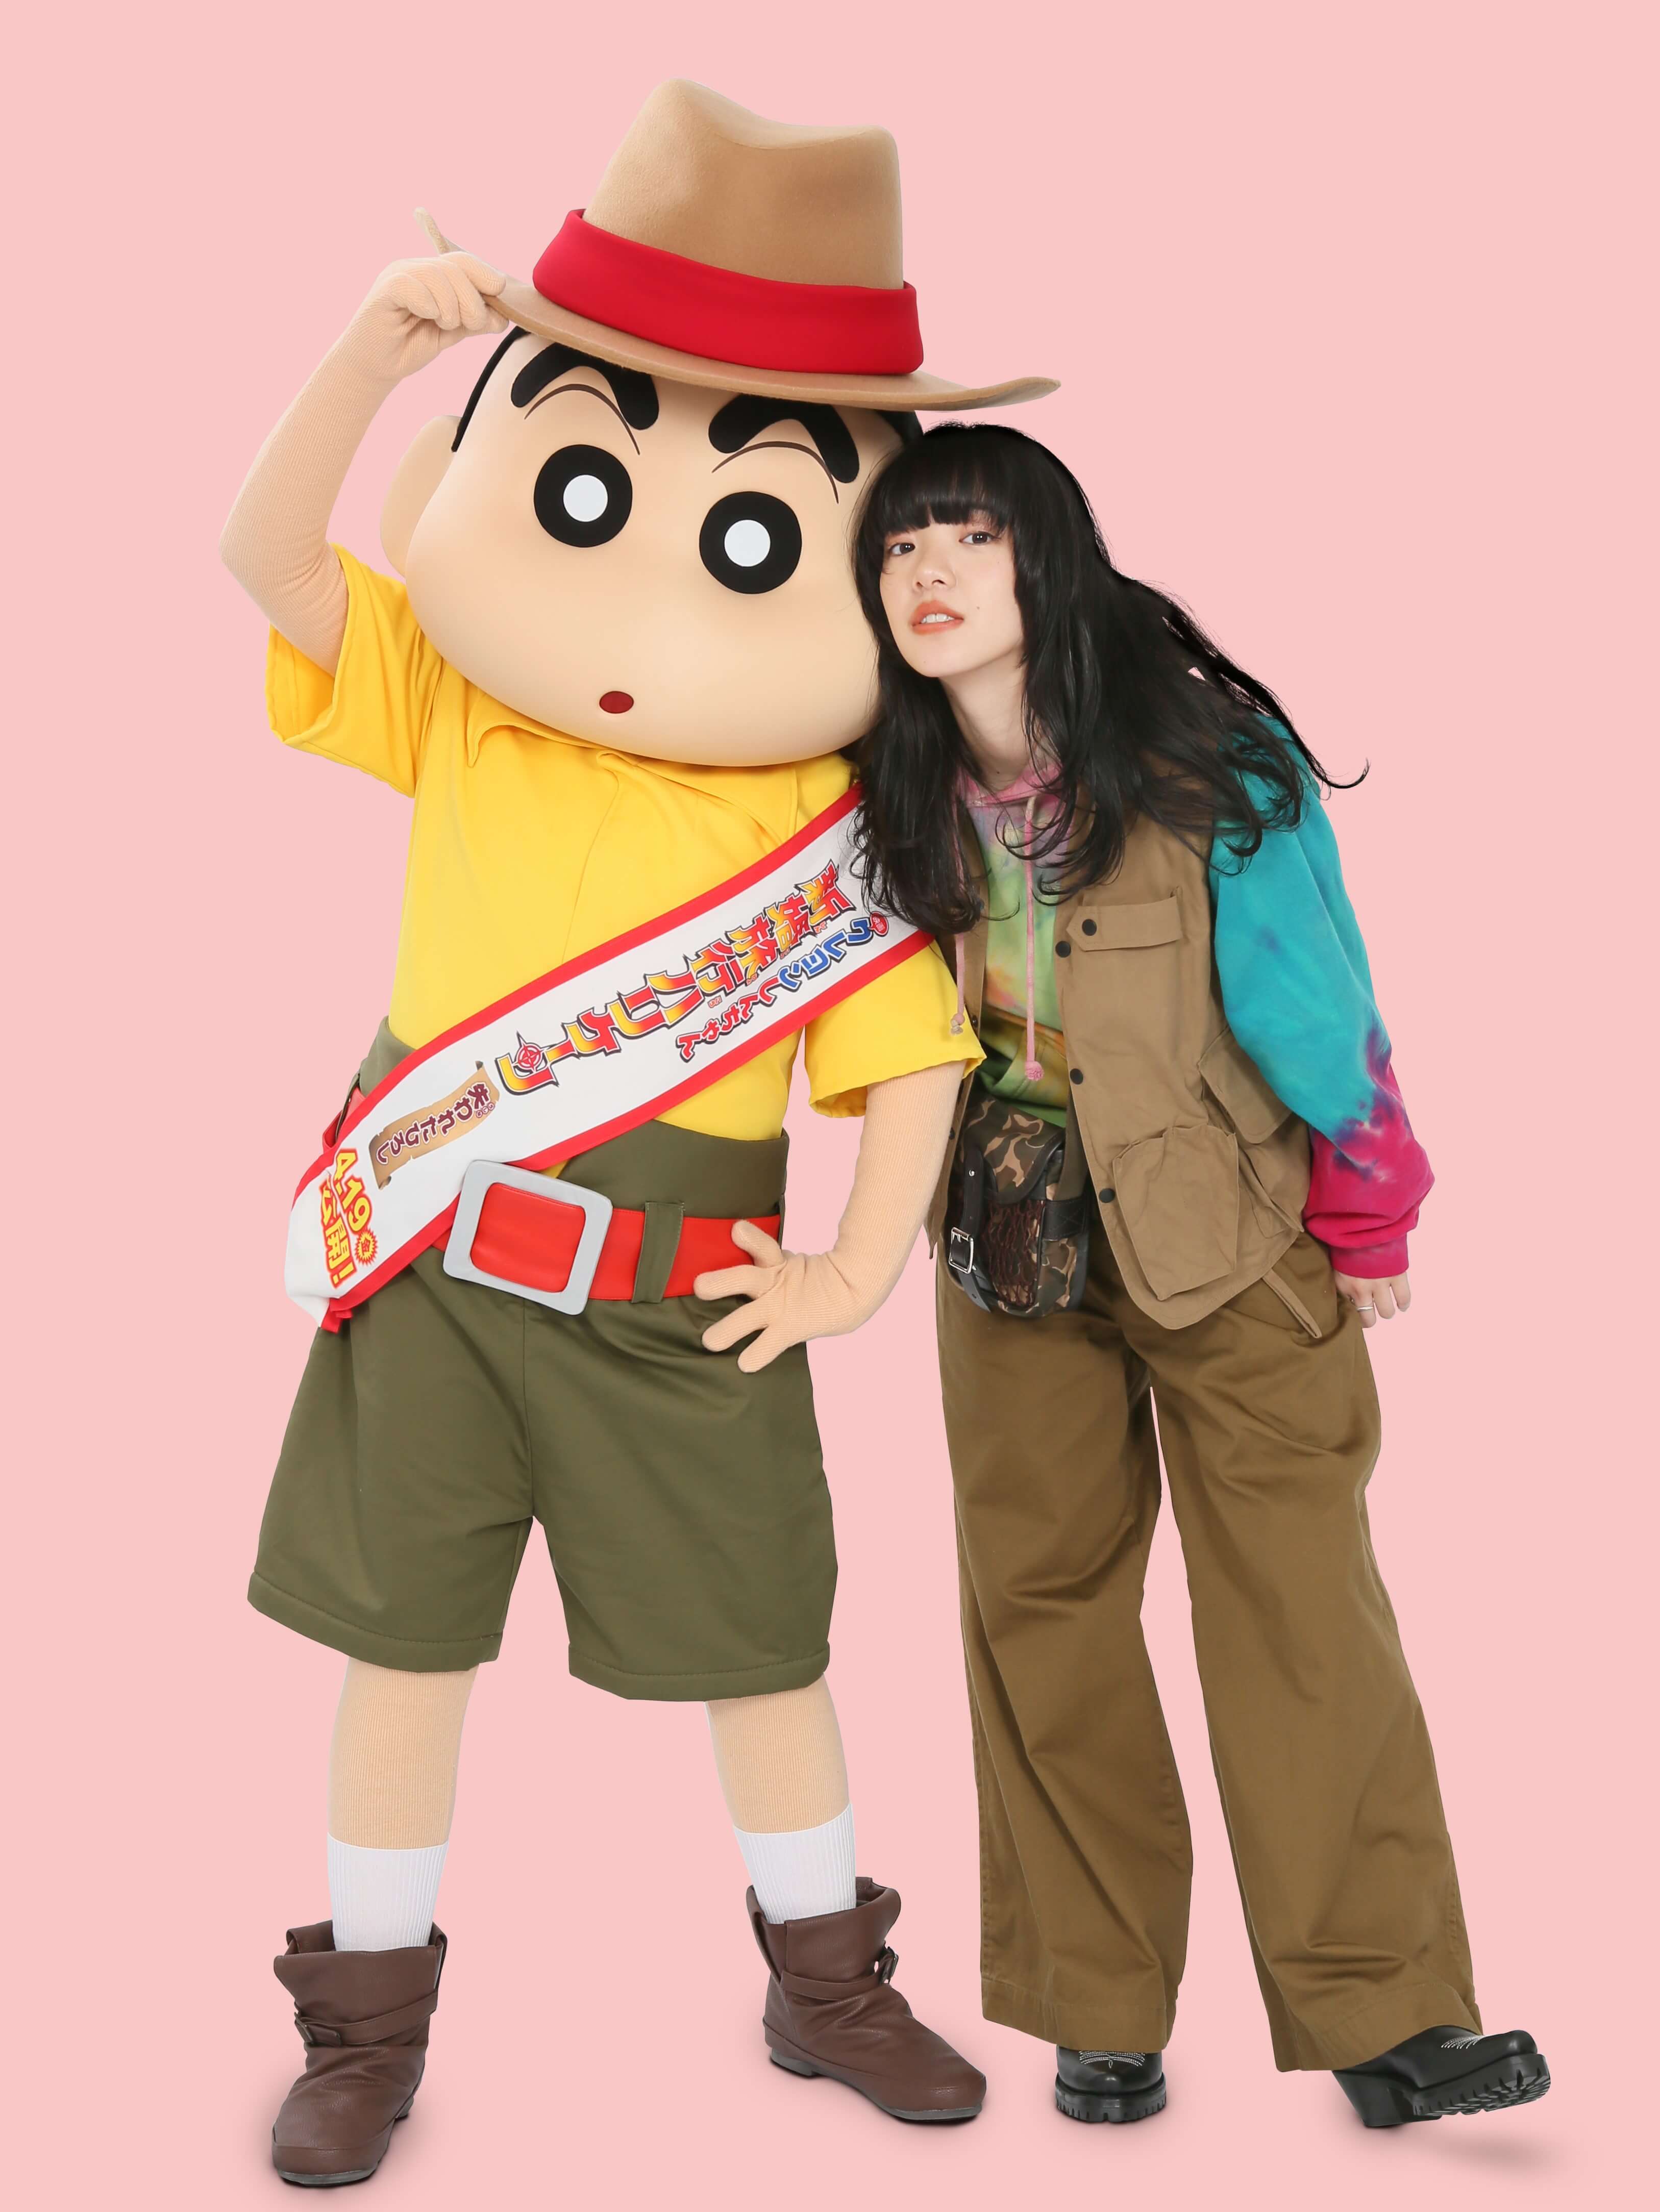 Catsuka  on Twitter Crayon ShinChan SpinOff anime series 4  seasons is now available in many countries with english subs on Amazon  Prime Video  httpstcoXftujpmcbl httpstcofzv0BNccRE  Twitter